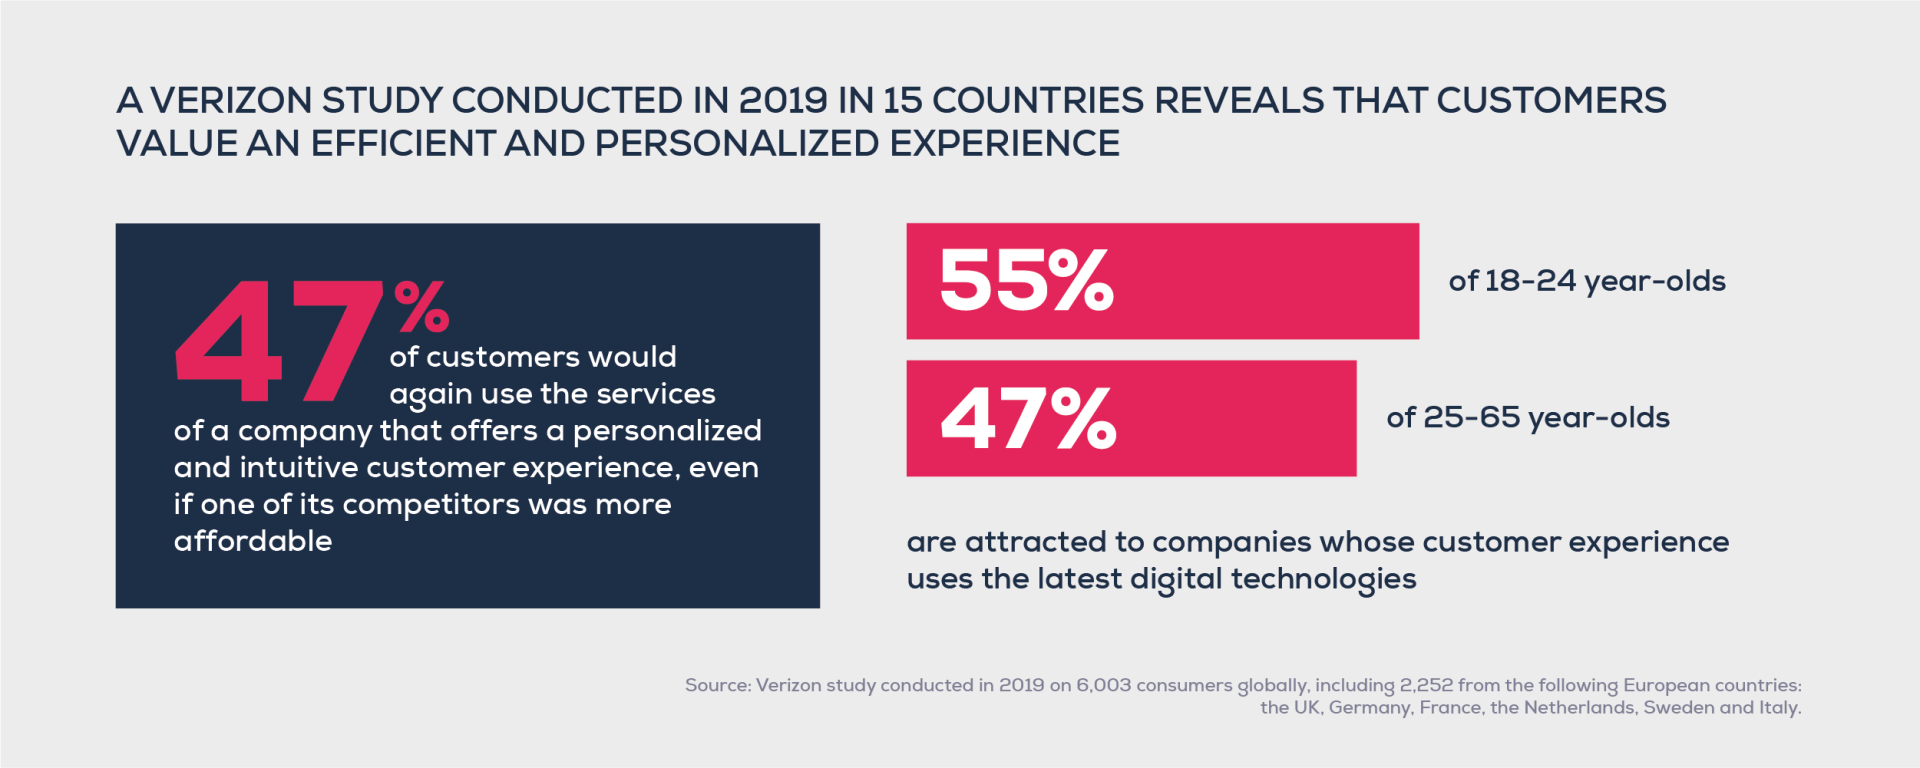 Verizon study - Customers value an efficient and personalized experience